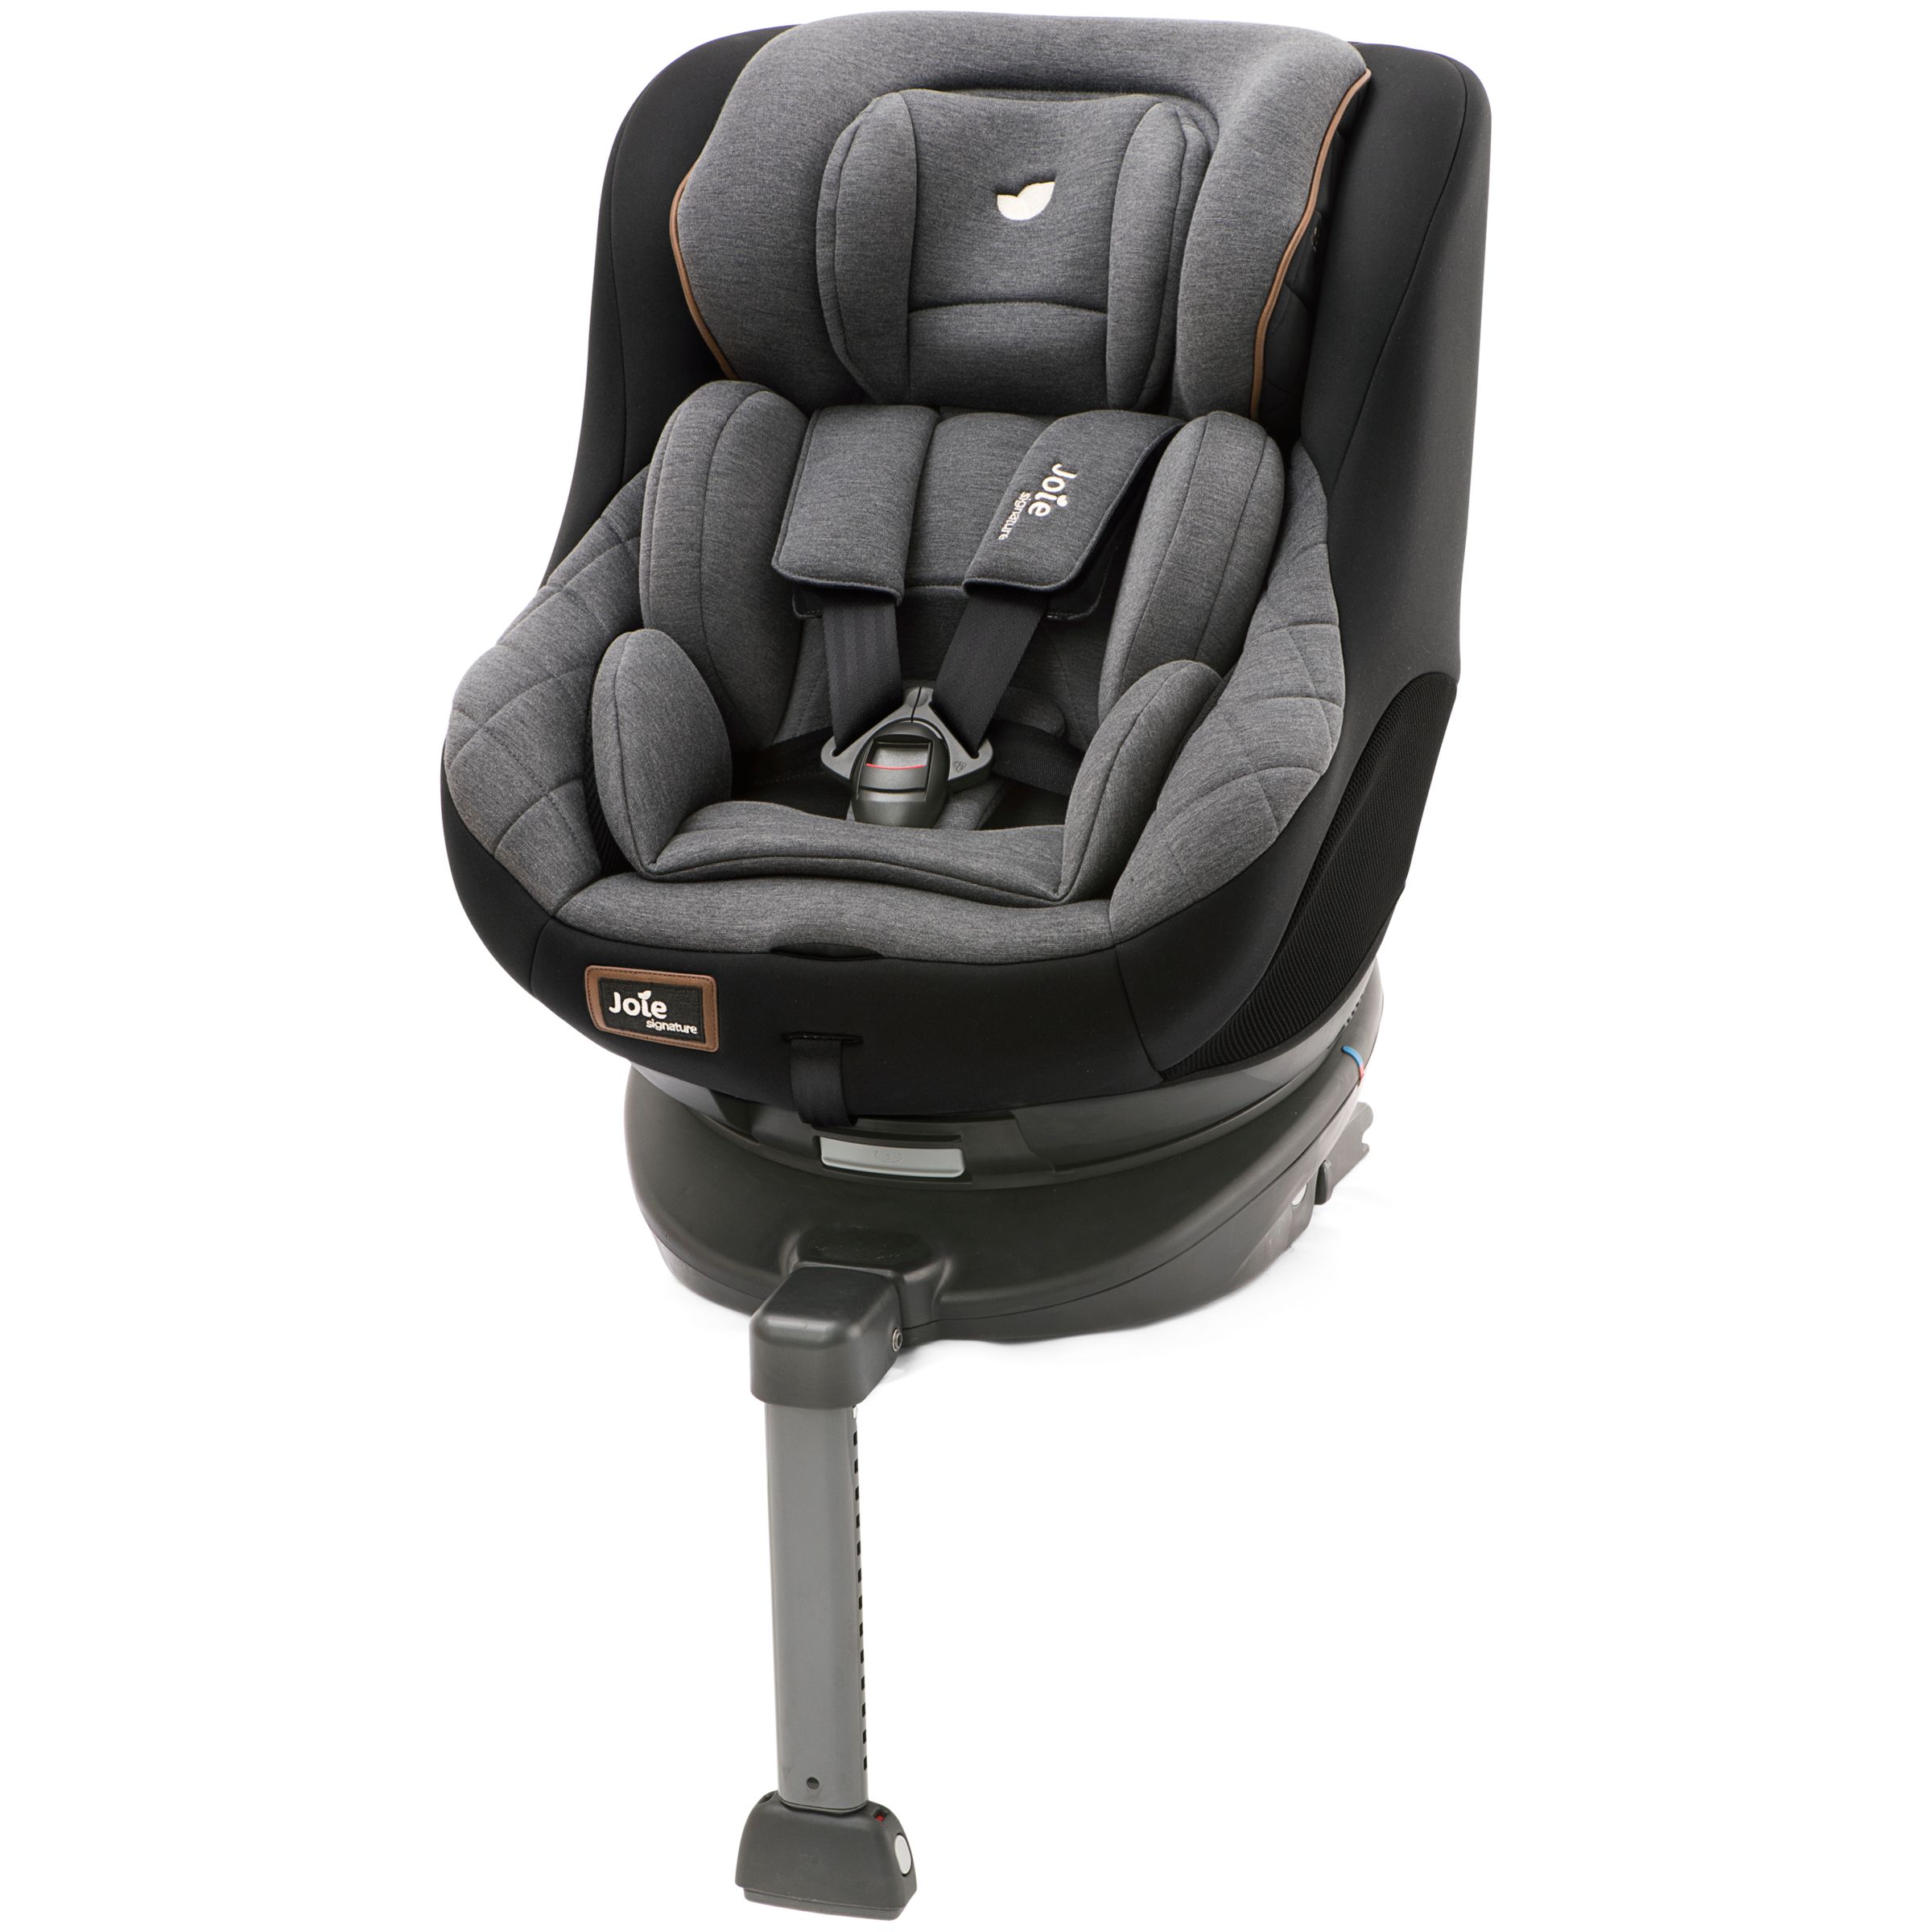 Joie Baby Spin 360 Signature Group 0+/1 Car Seat, Noir at John Lewis